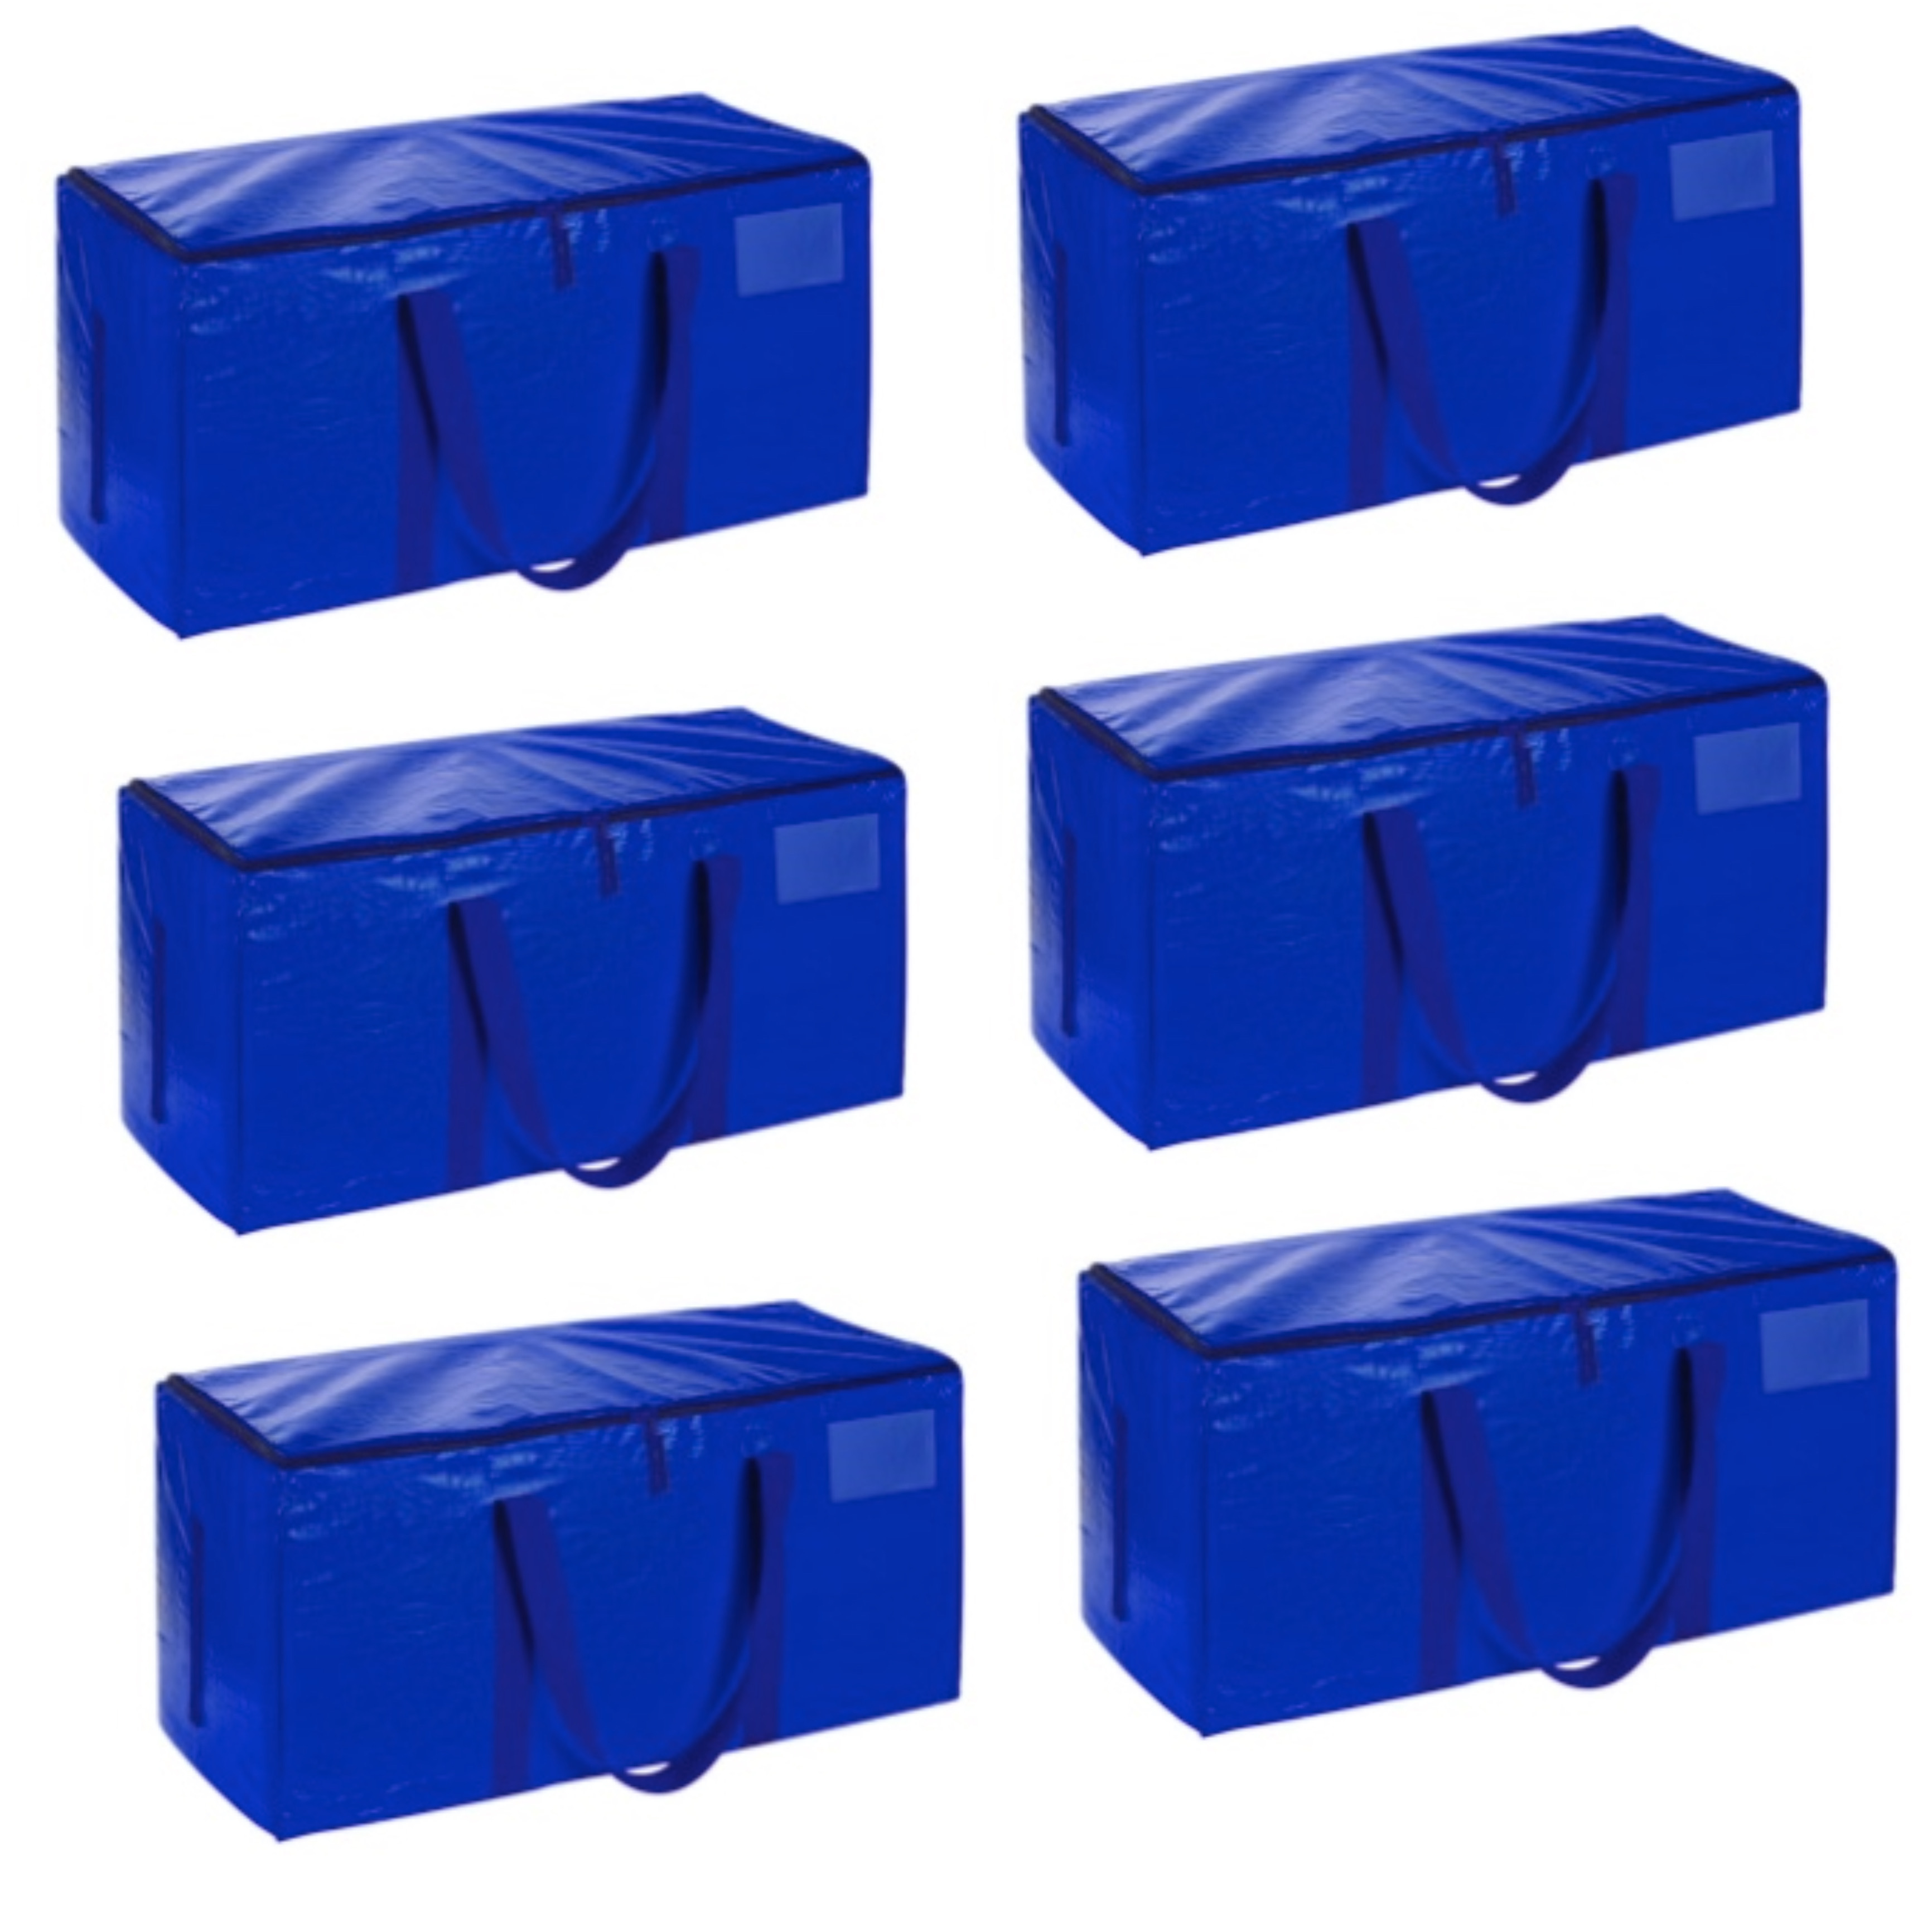 Extra Large Capacity Storage Bags With Zippers & Carrying Handles